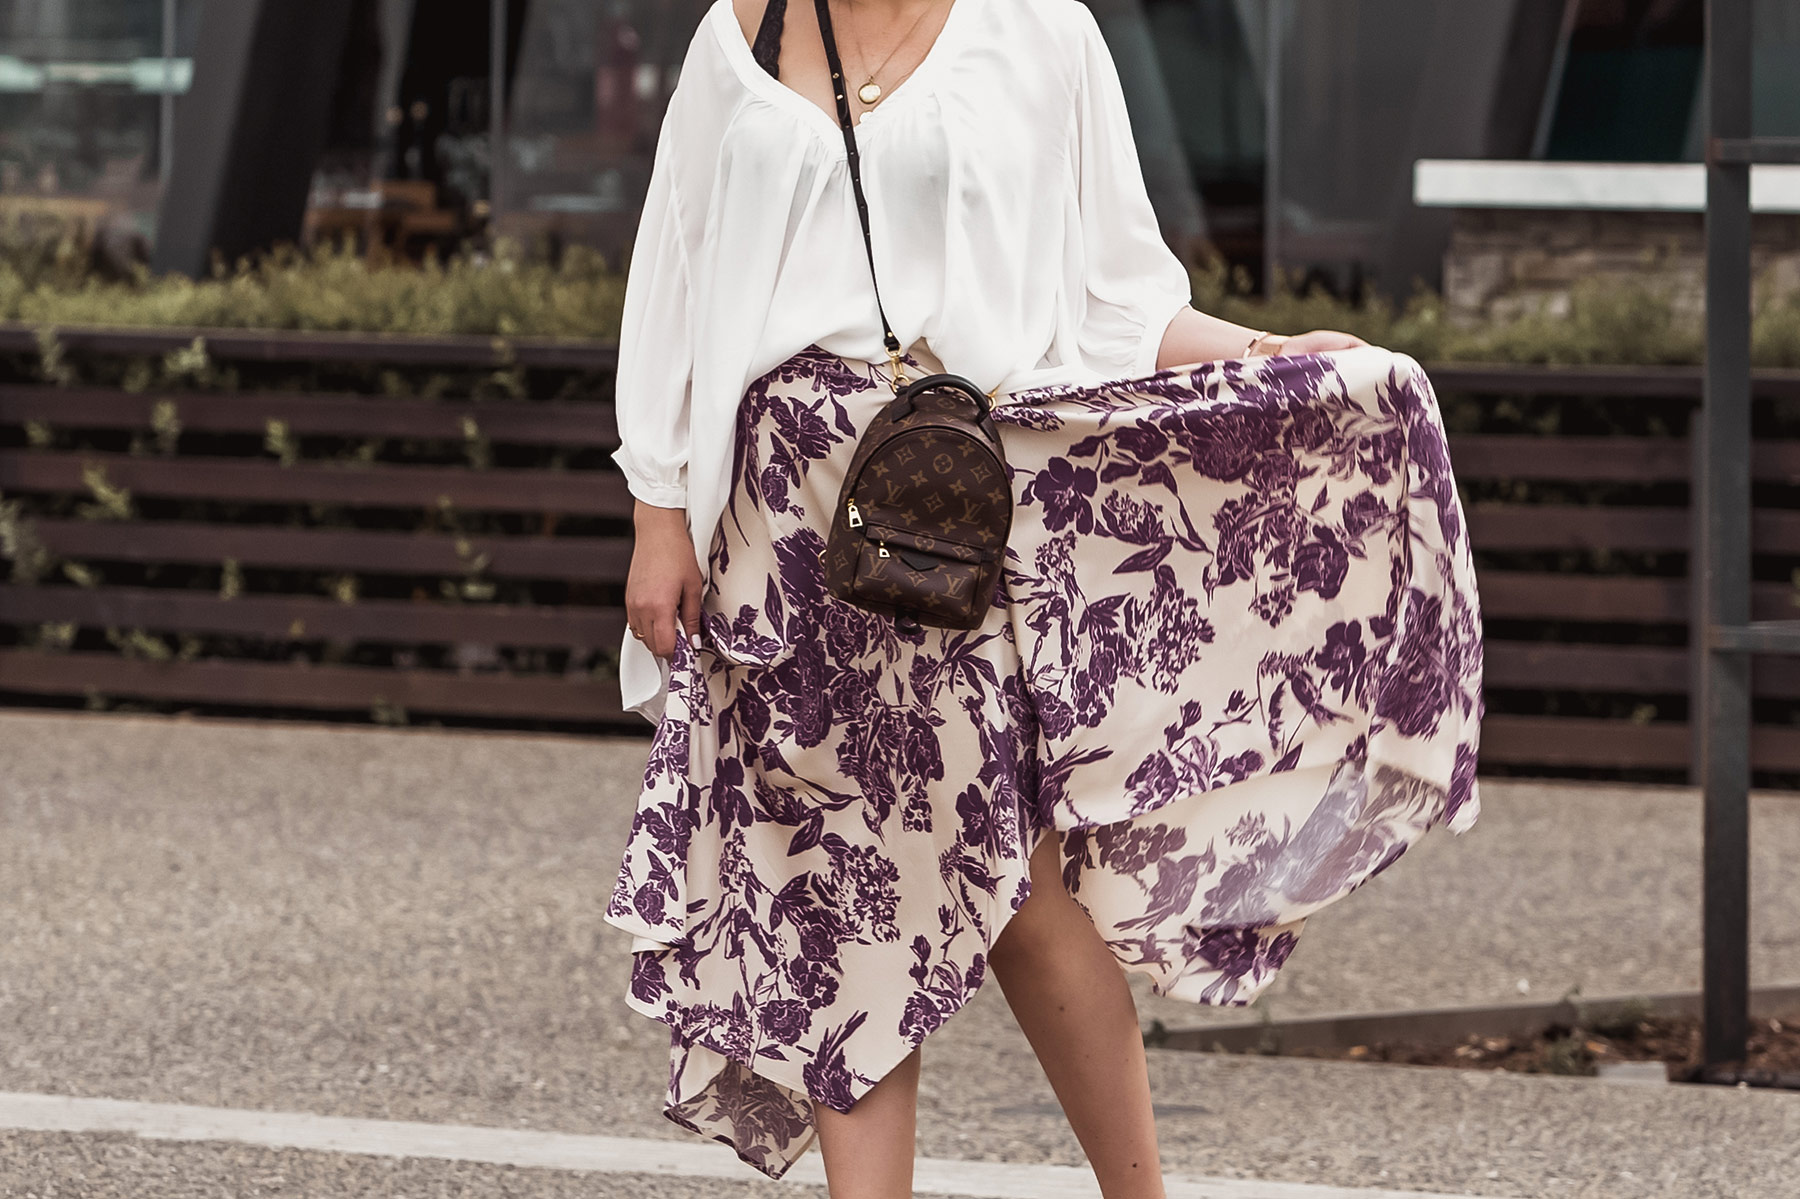 5 Tips To Rock The Oversized Look by Stella Asteria - Wearing oversized short, asymmetrical skirt, Louis Vuitton Palm Springs backpack, Chanel slingbacks and cat-eye sunglasses - Spring Style Inspiration